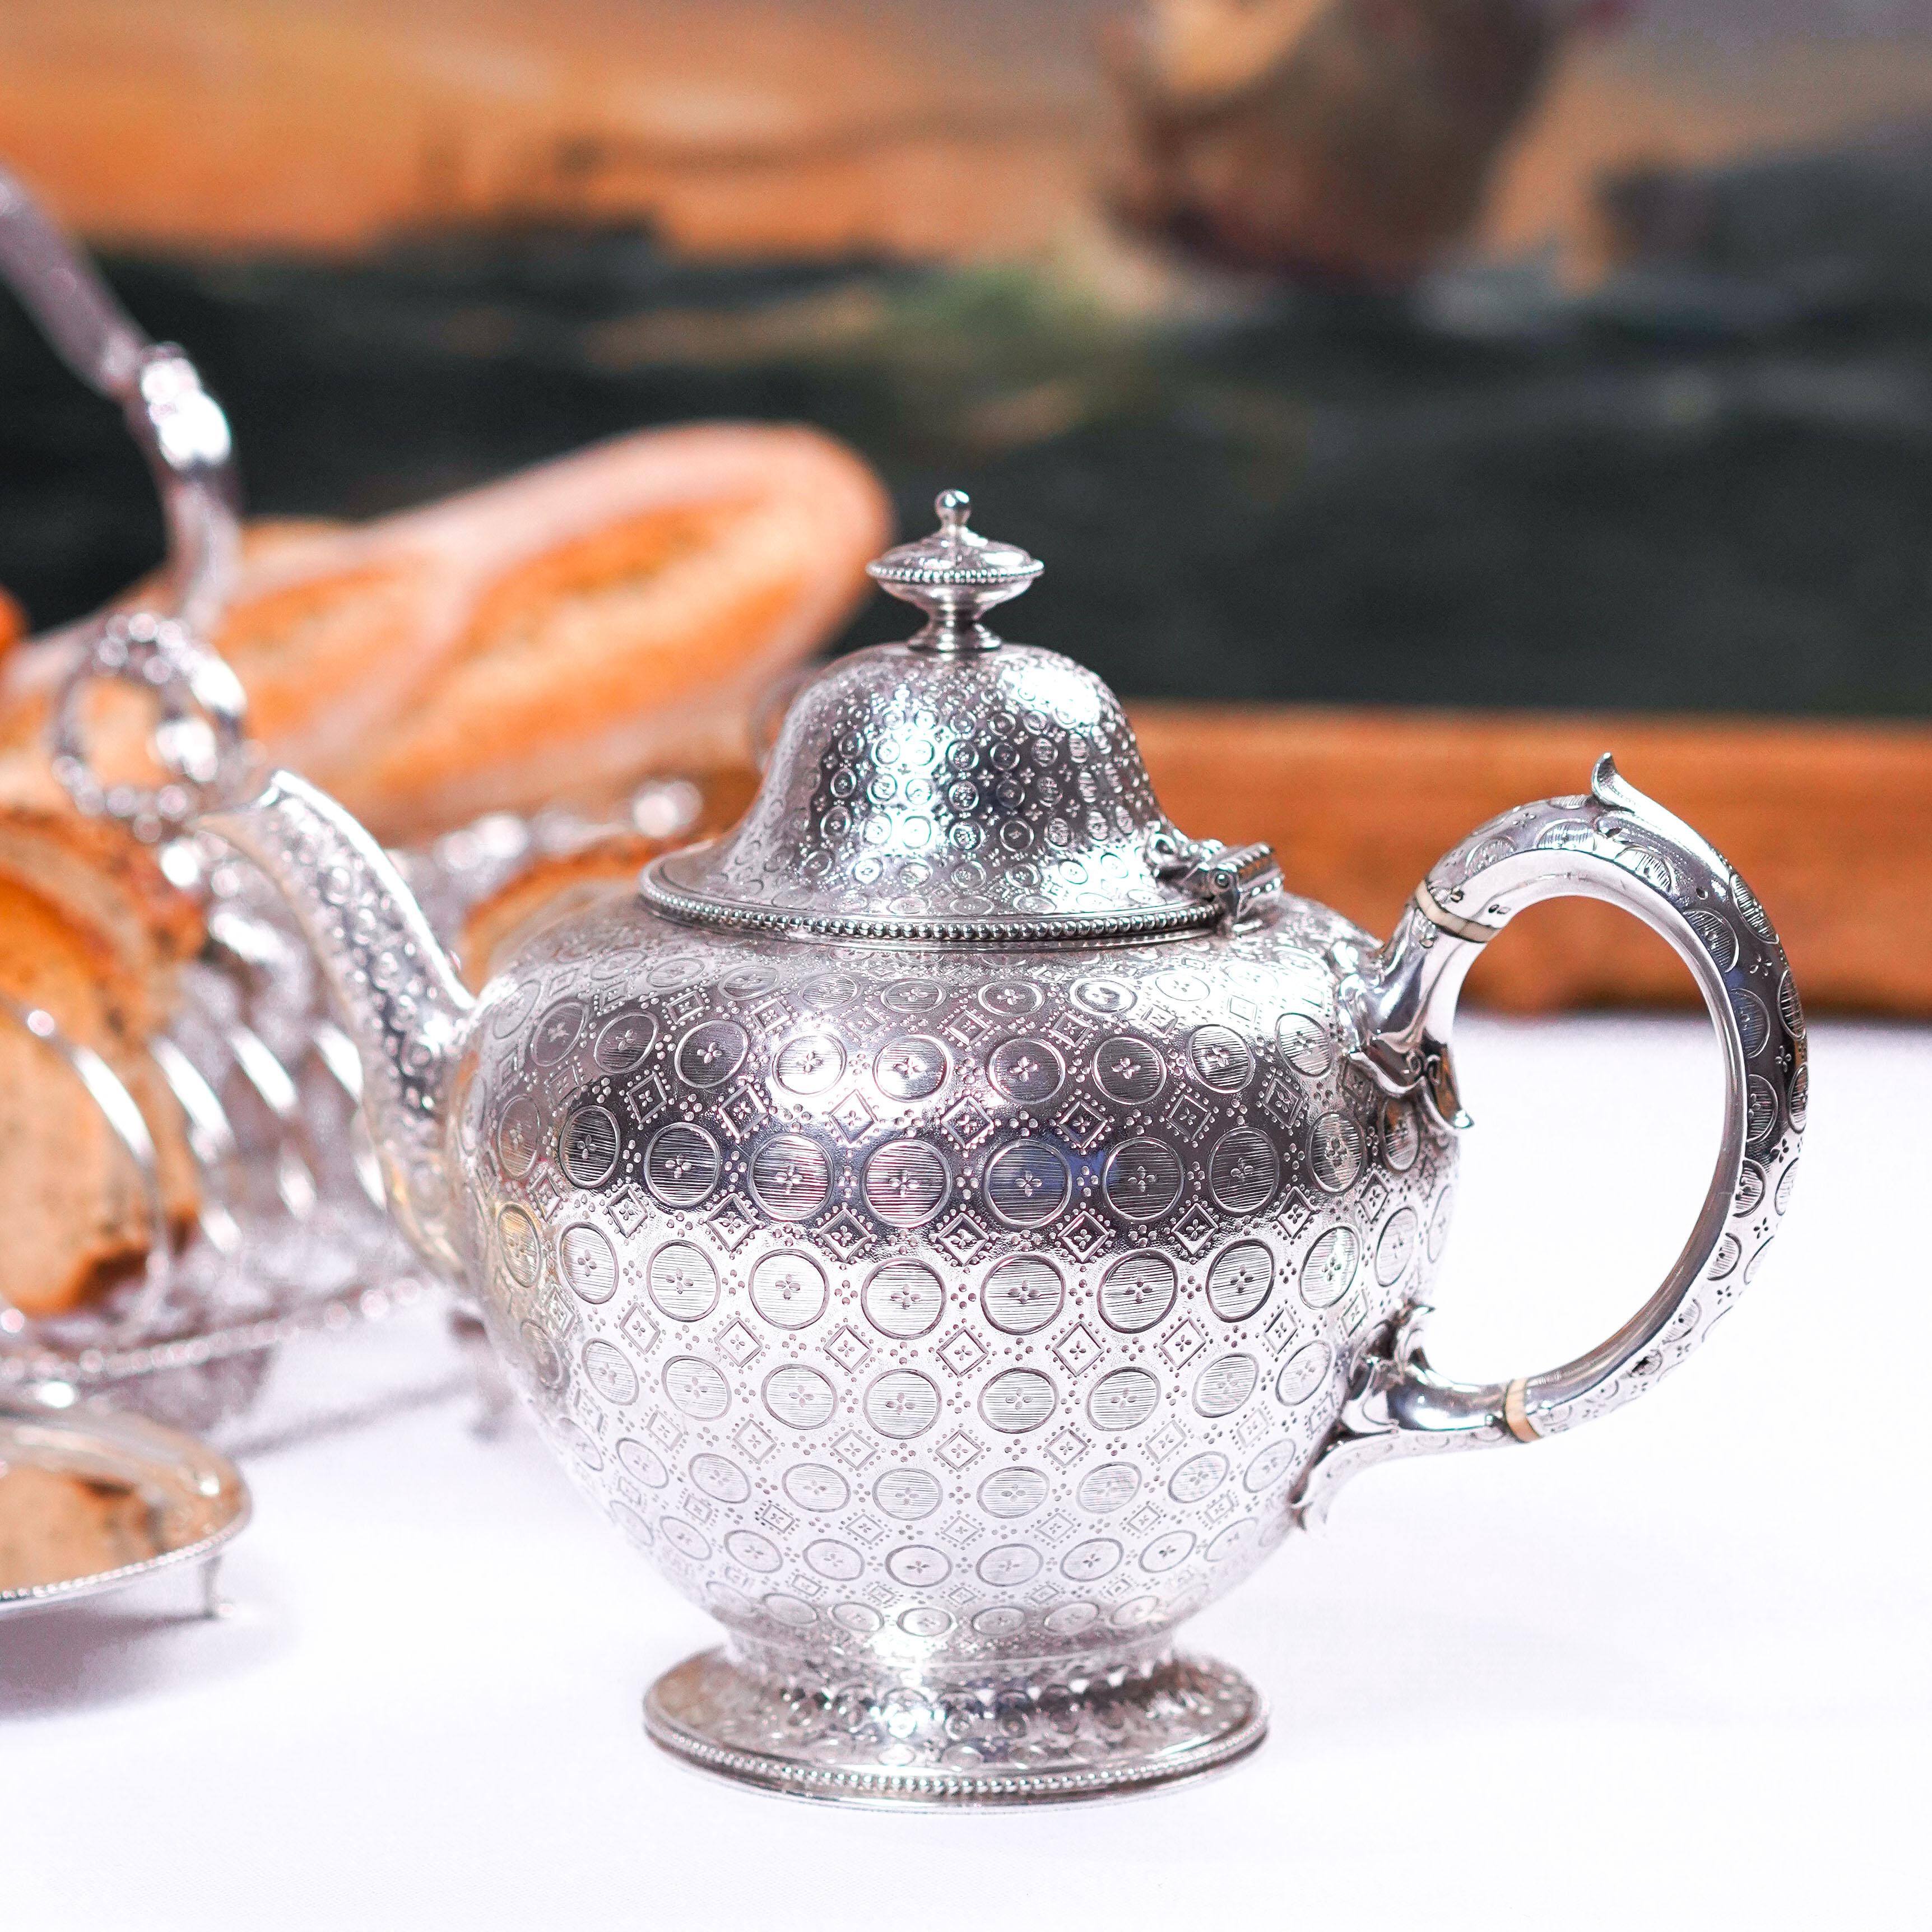 We are delighted to offer this unique and exquisite Victorian solid silver teapot made by the renowned silversmiths, Barnards of London in 1863.
  
The teapot features a classical bulbous overall design with generous proportions allowing for